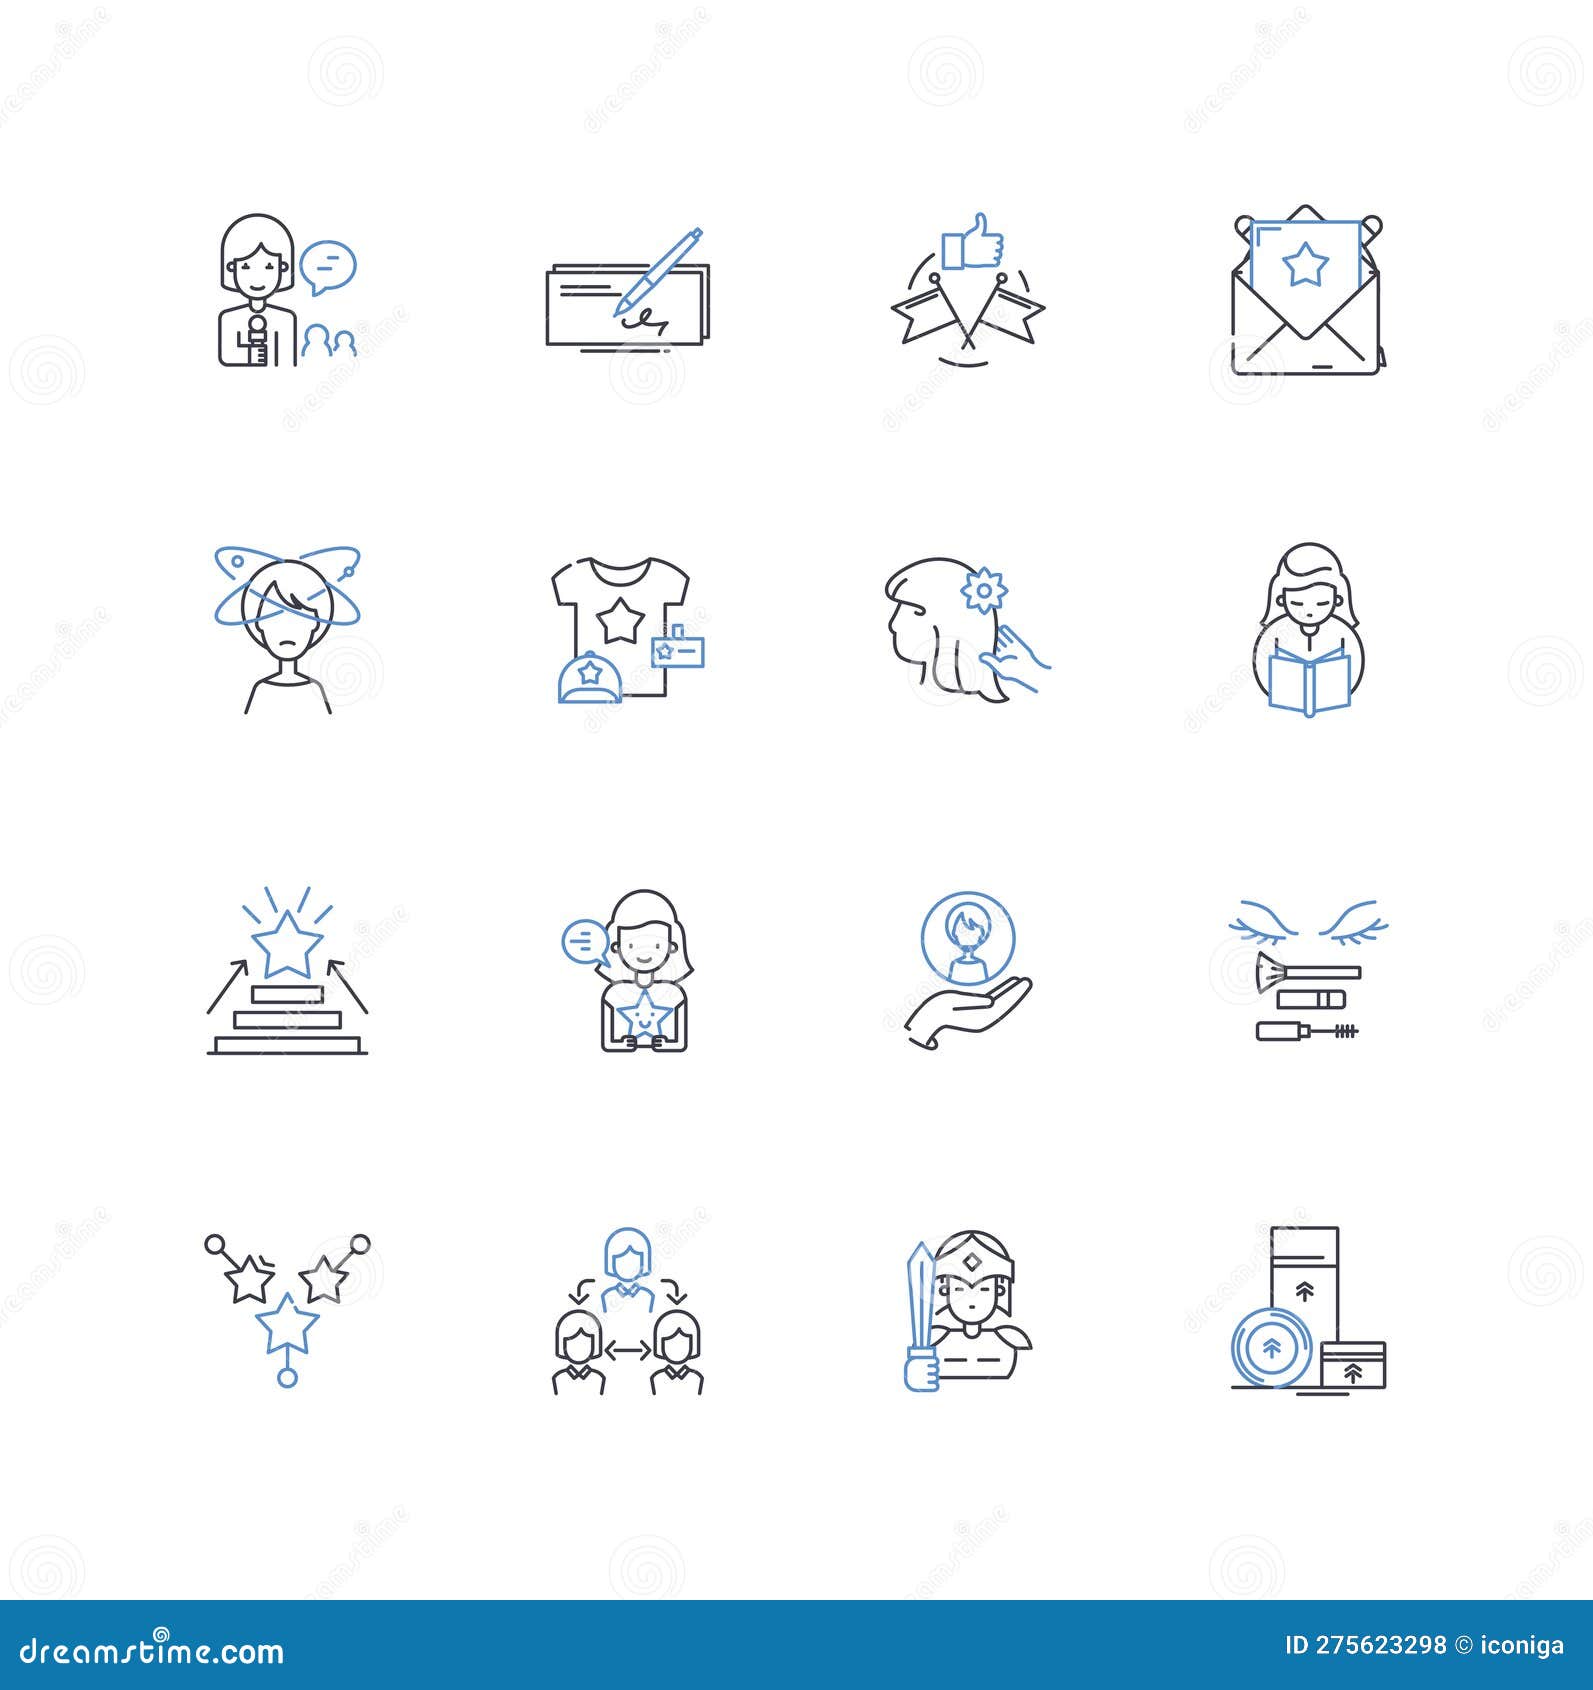 gender discrimination line icons collection. inequality, oppression, bias, prejudice, stereotypes, chauvinism